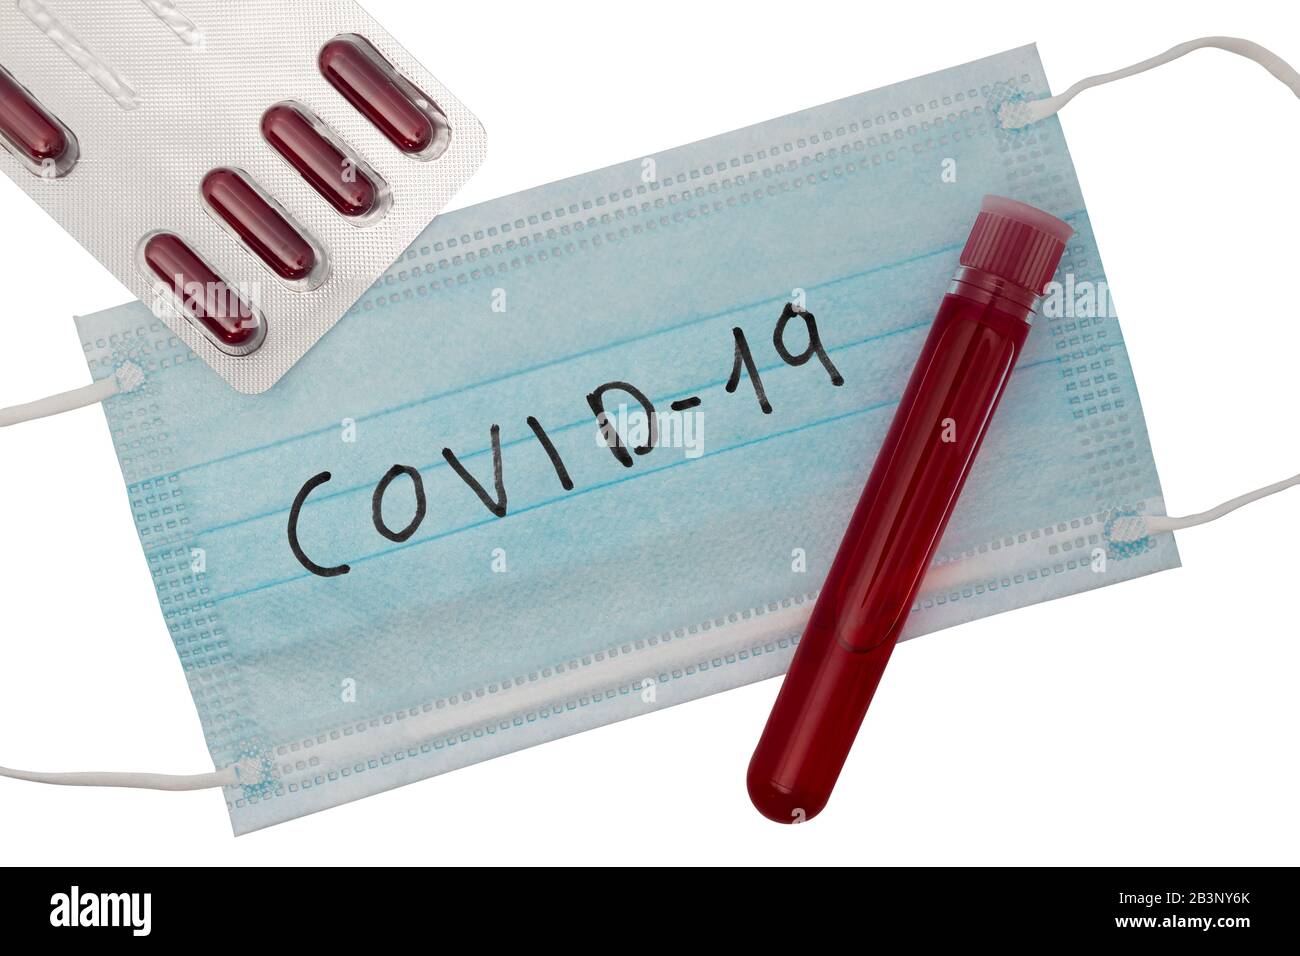 Coronavirus blood test concept. Top view with pills, test tube with patient blood and respiratory mask. Chinese Wuhan virus outbreak. 2019-nCoV (COVID Stock Photo